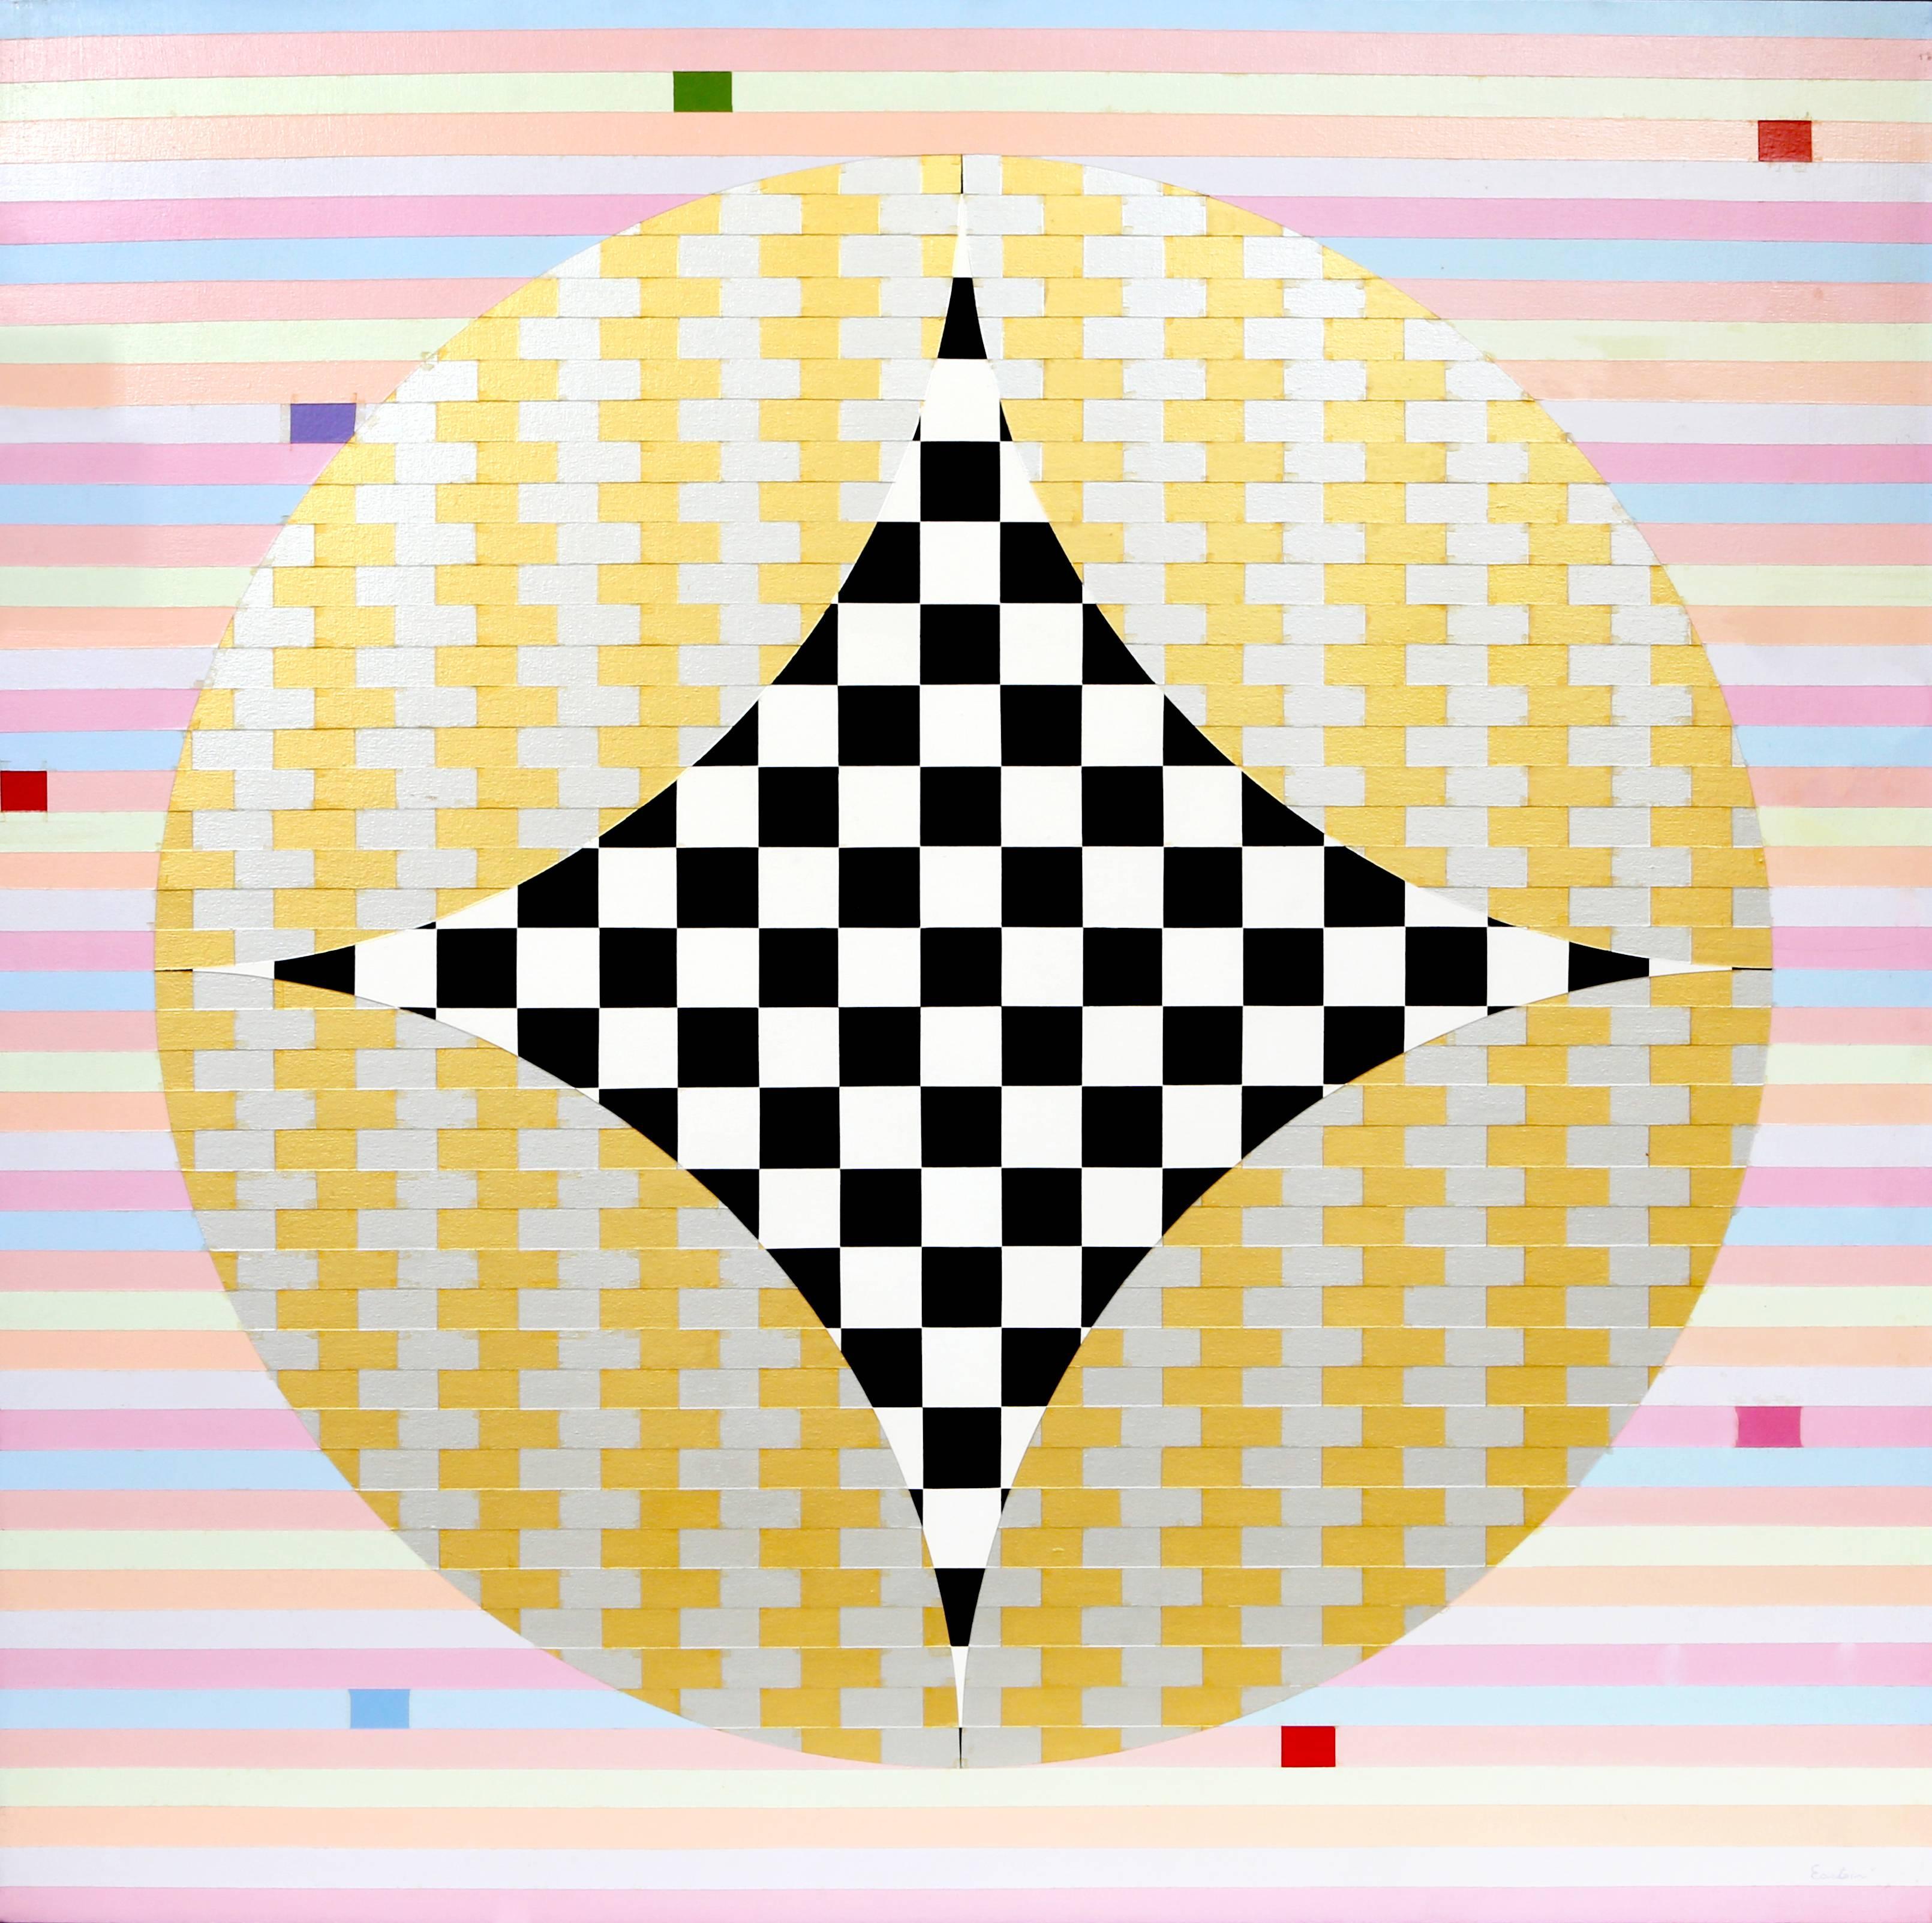 Artist: Max Epstein
Title: Untitled - Abstract with Checkers
Year: 1974
Medium: Acrylic on Canvas, Signed Lower Right
Size: 48  x 48 in. (121.92  x 121.92 cm)
Frame Size: 49 x 49 inches

